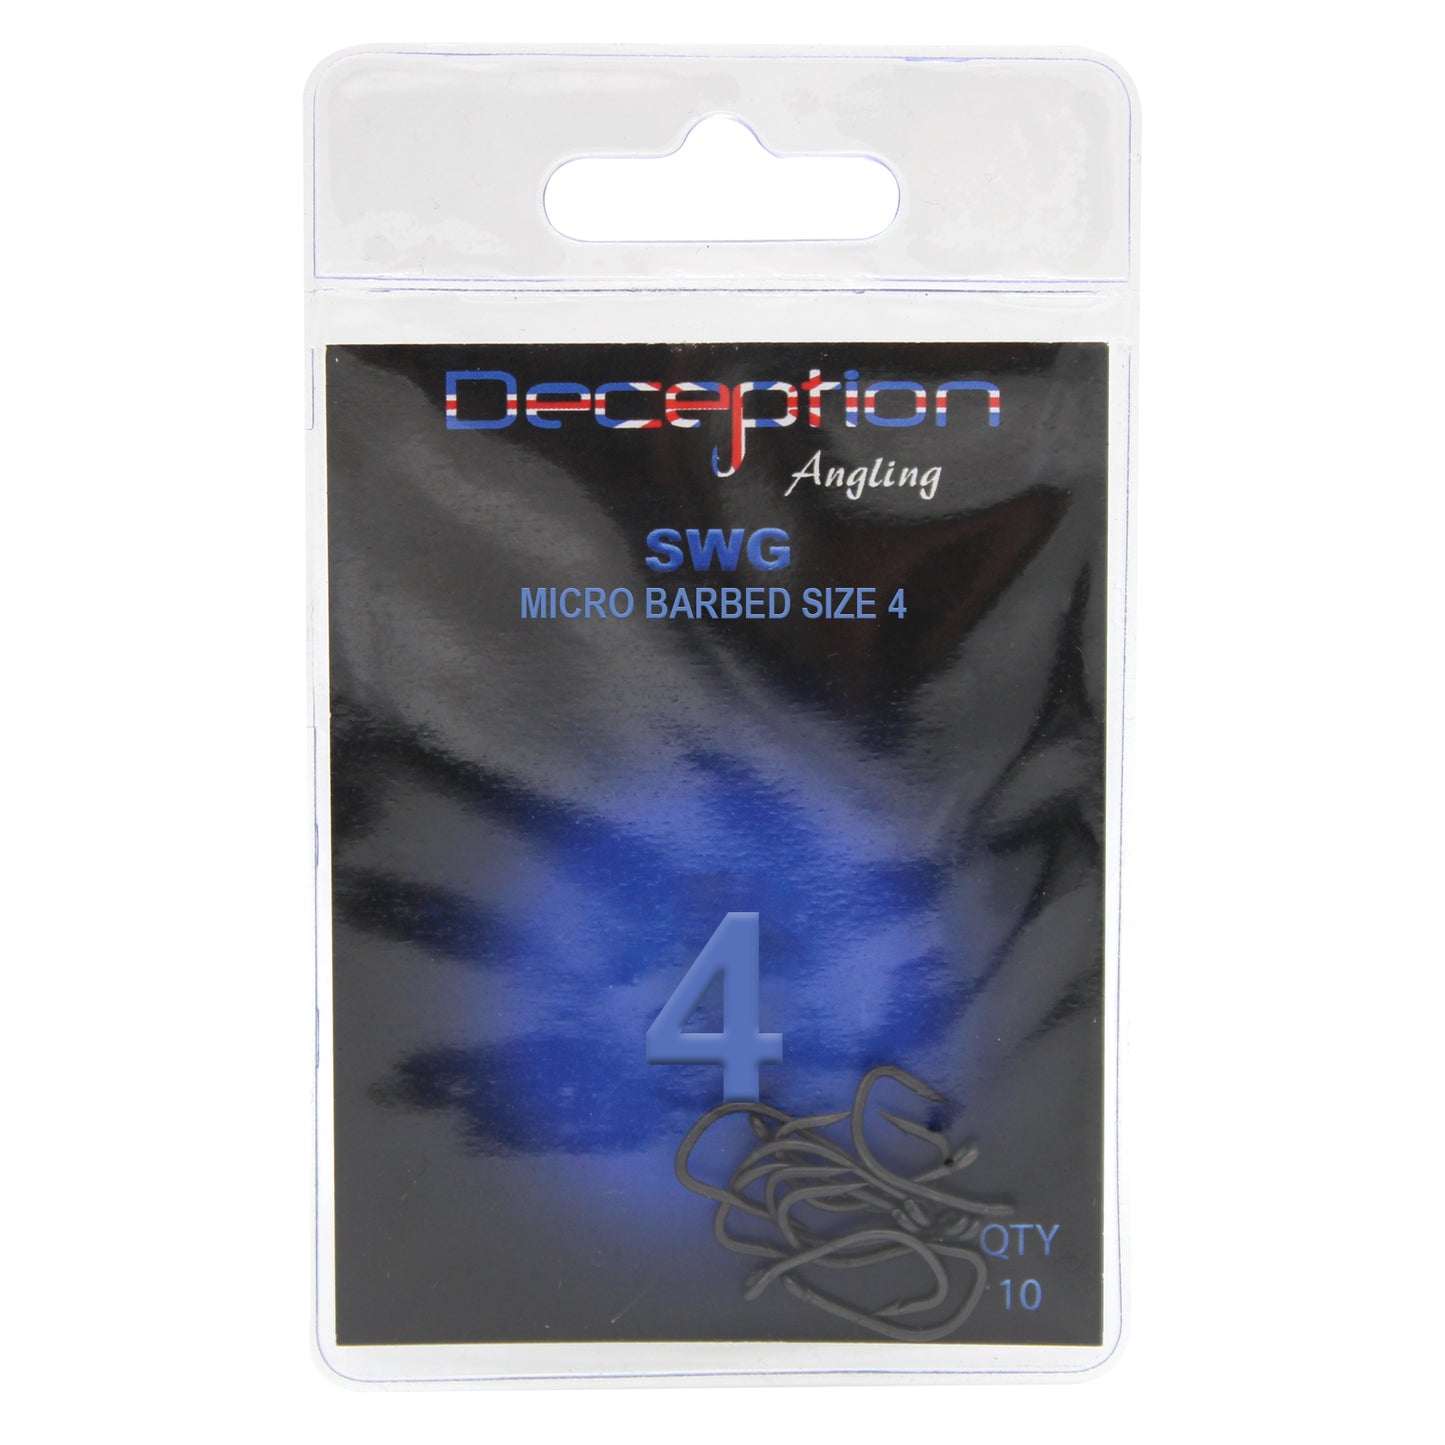 Deception Angling SWG Micro Barbed Hooks Size 4 Pack of 10 for Fishing